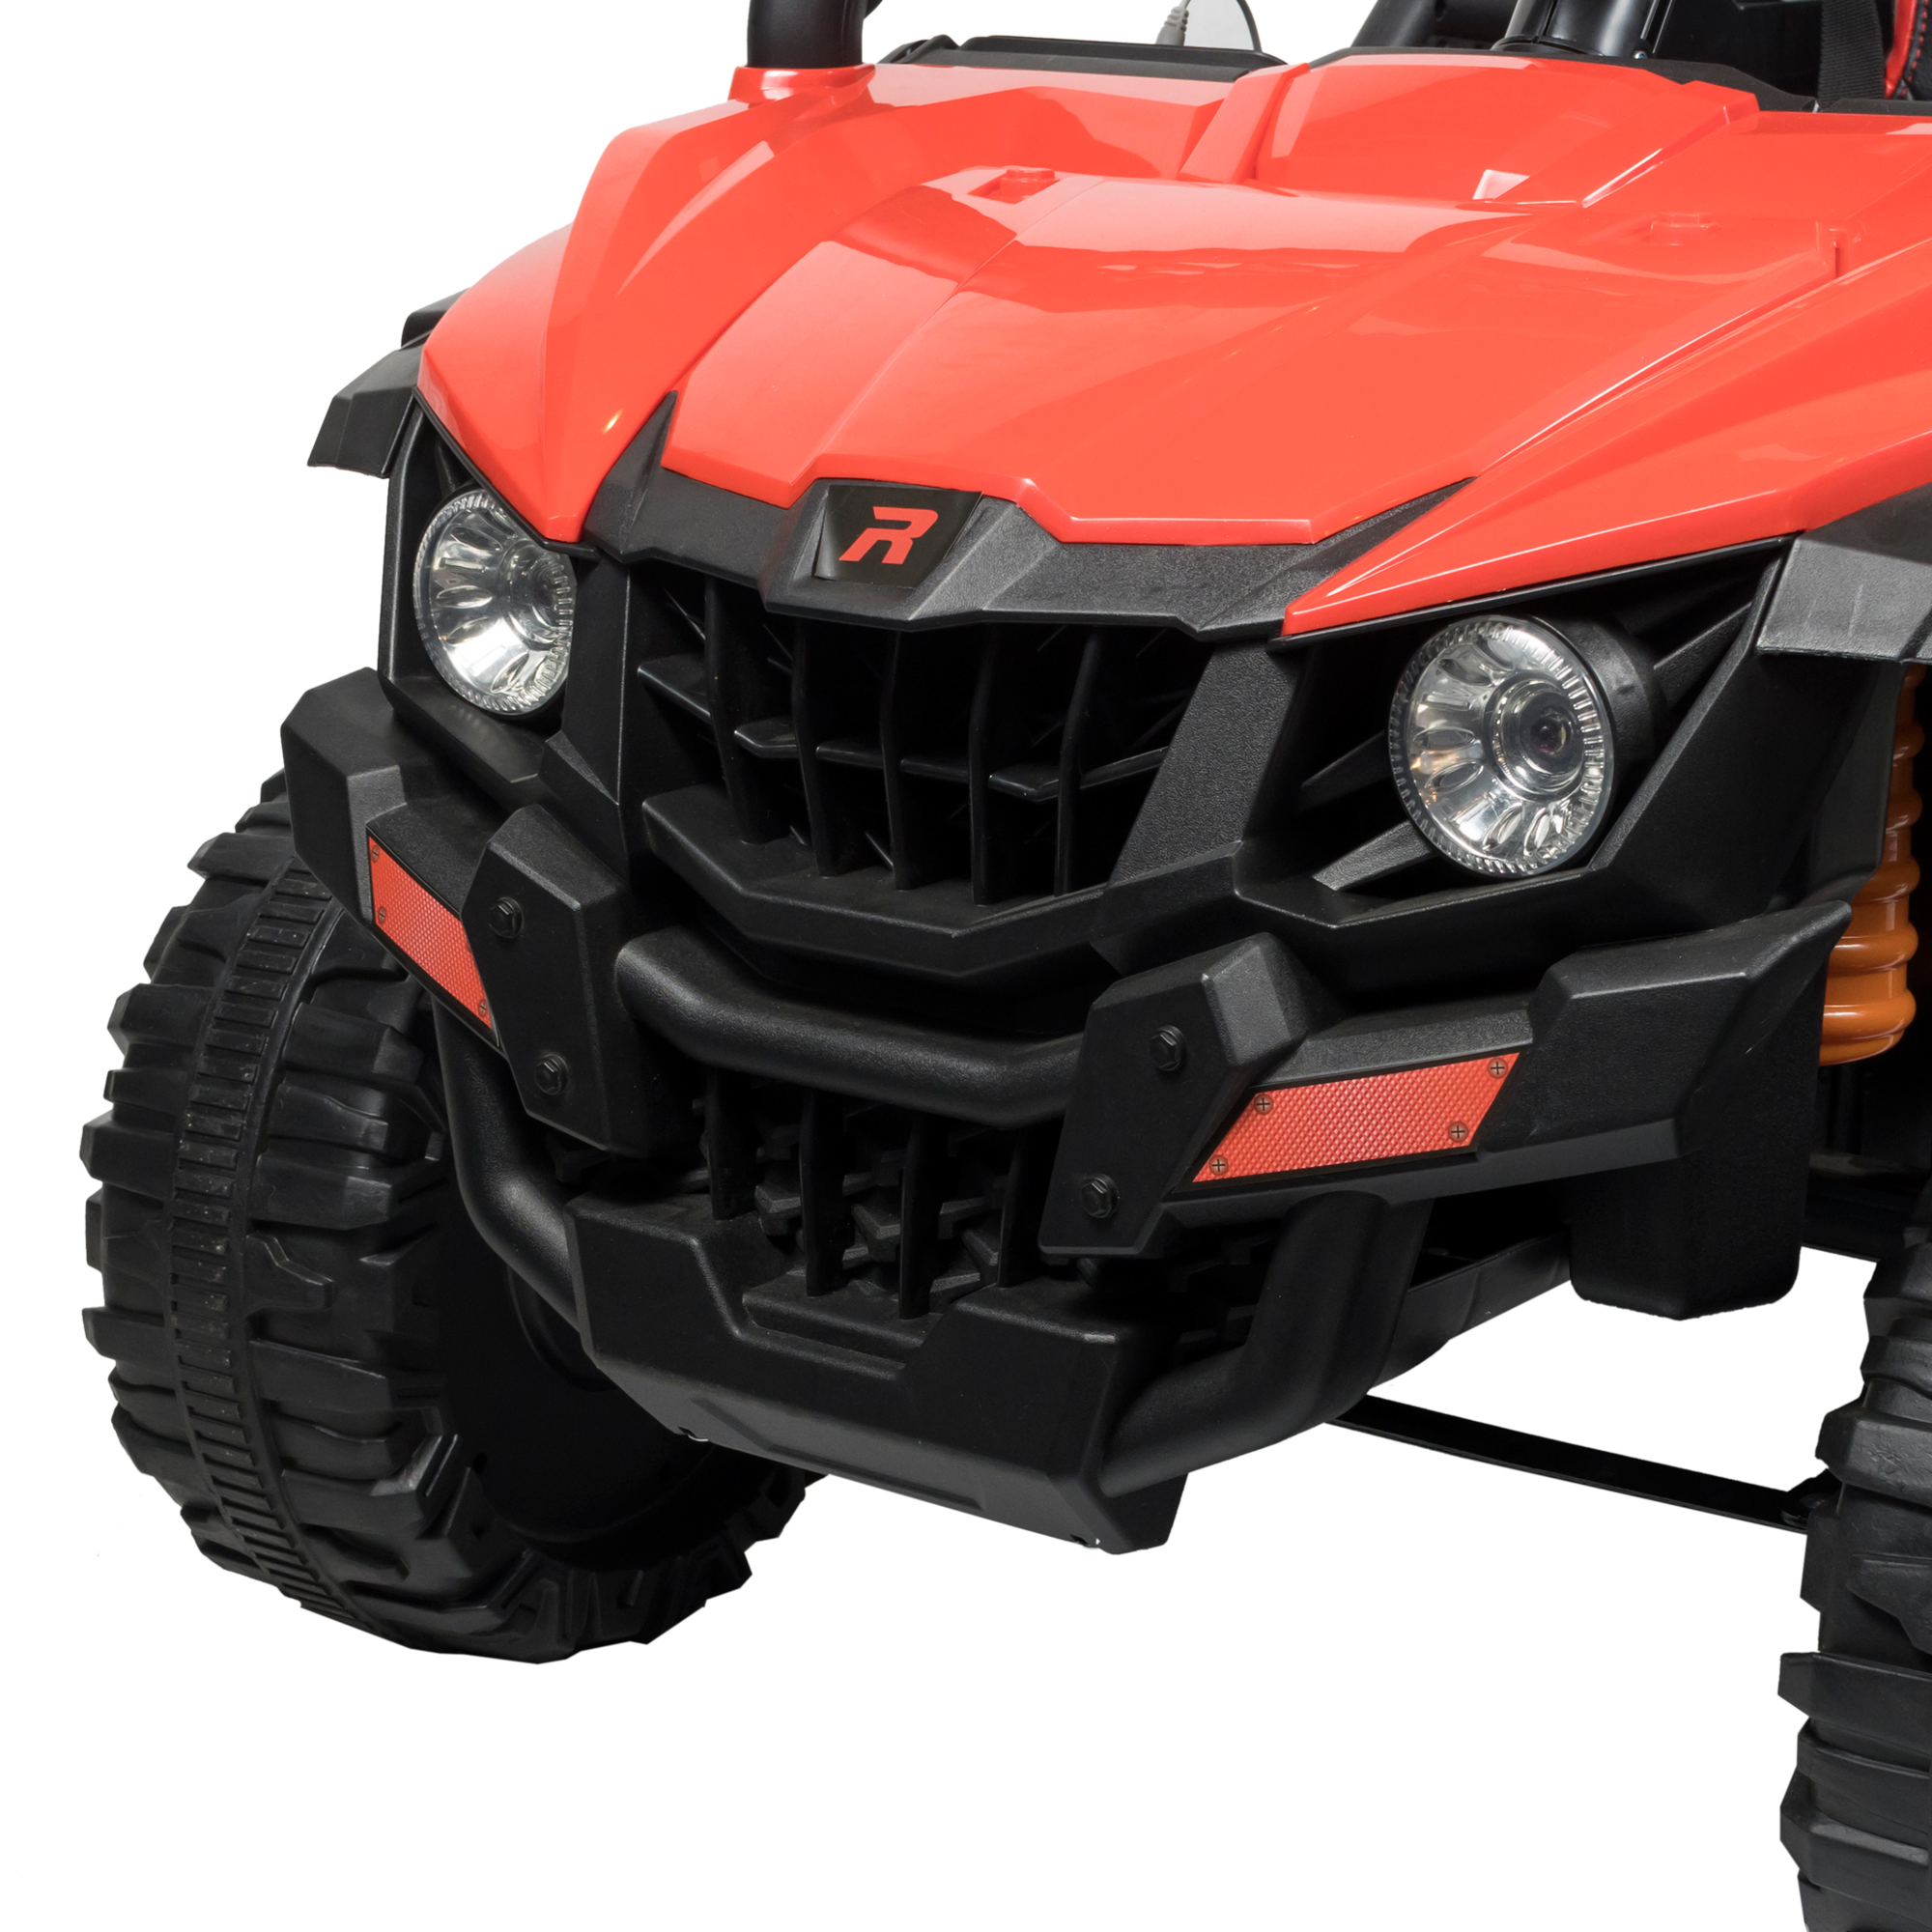 X2 ride-on 4 Wheeler For Kids - With Remote Control - Red